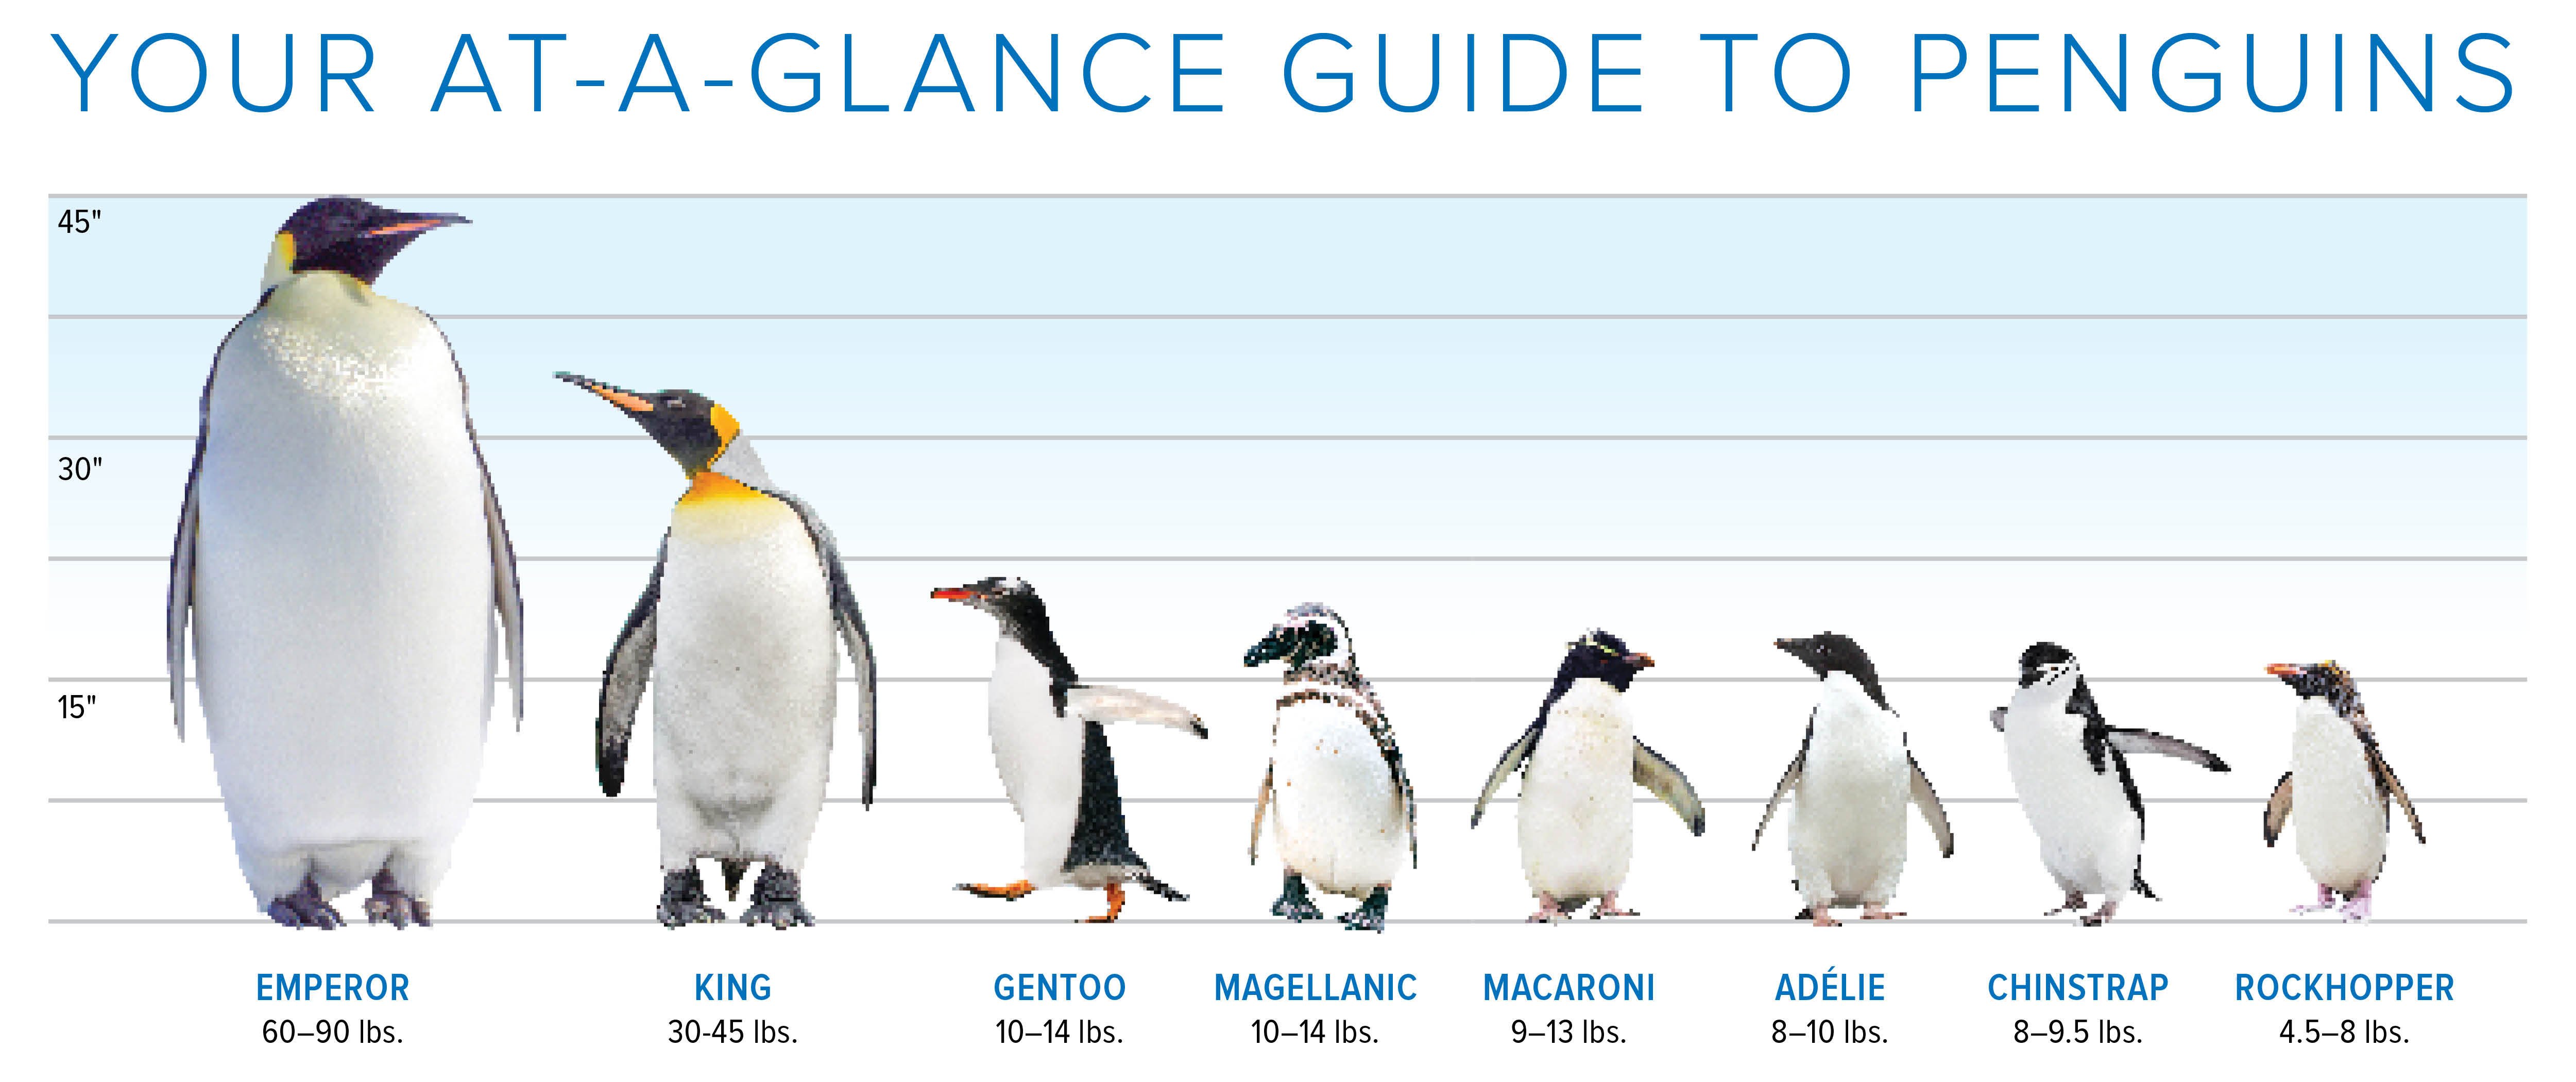 Meet The Elite 8: Penguins Of The Southern Ocean